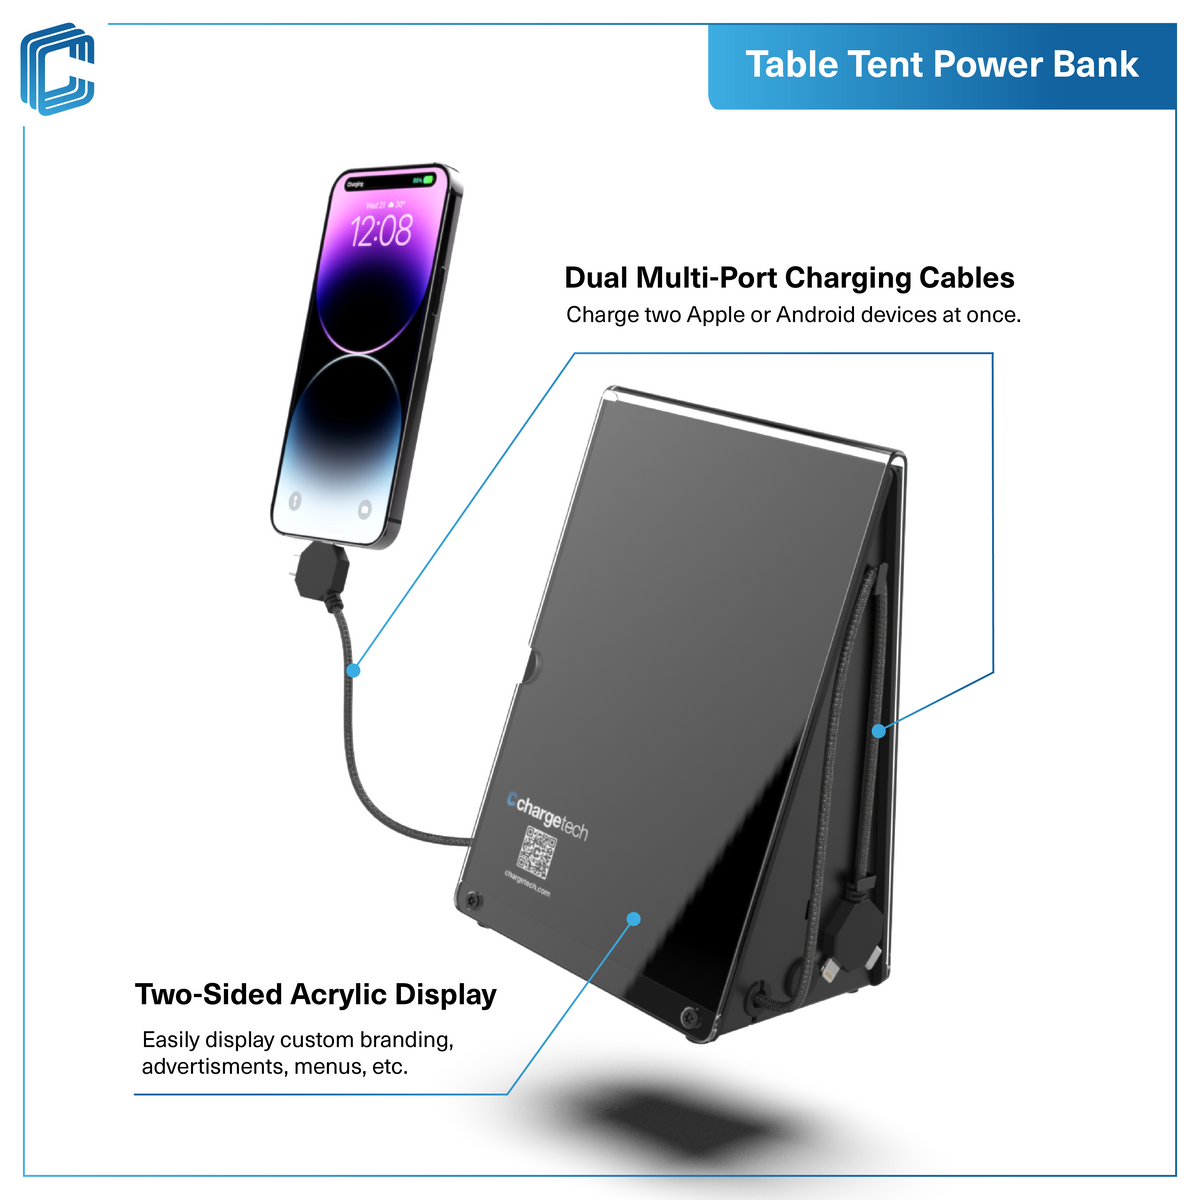 Table Tent Power Bank